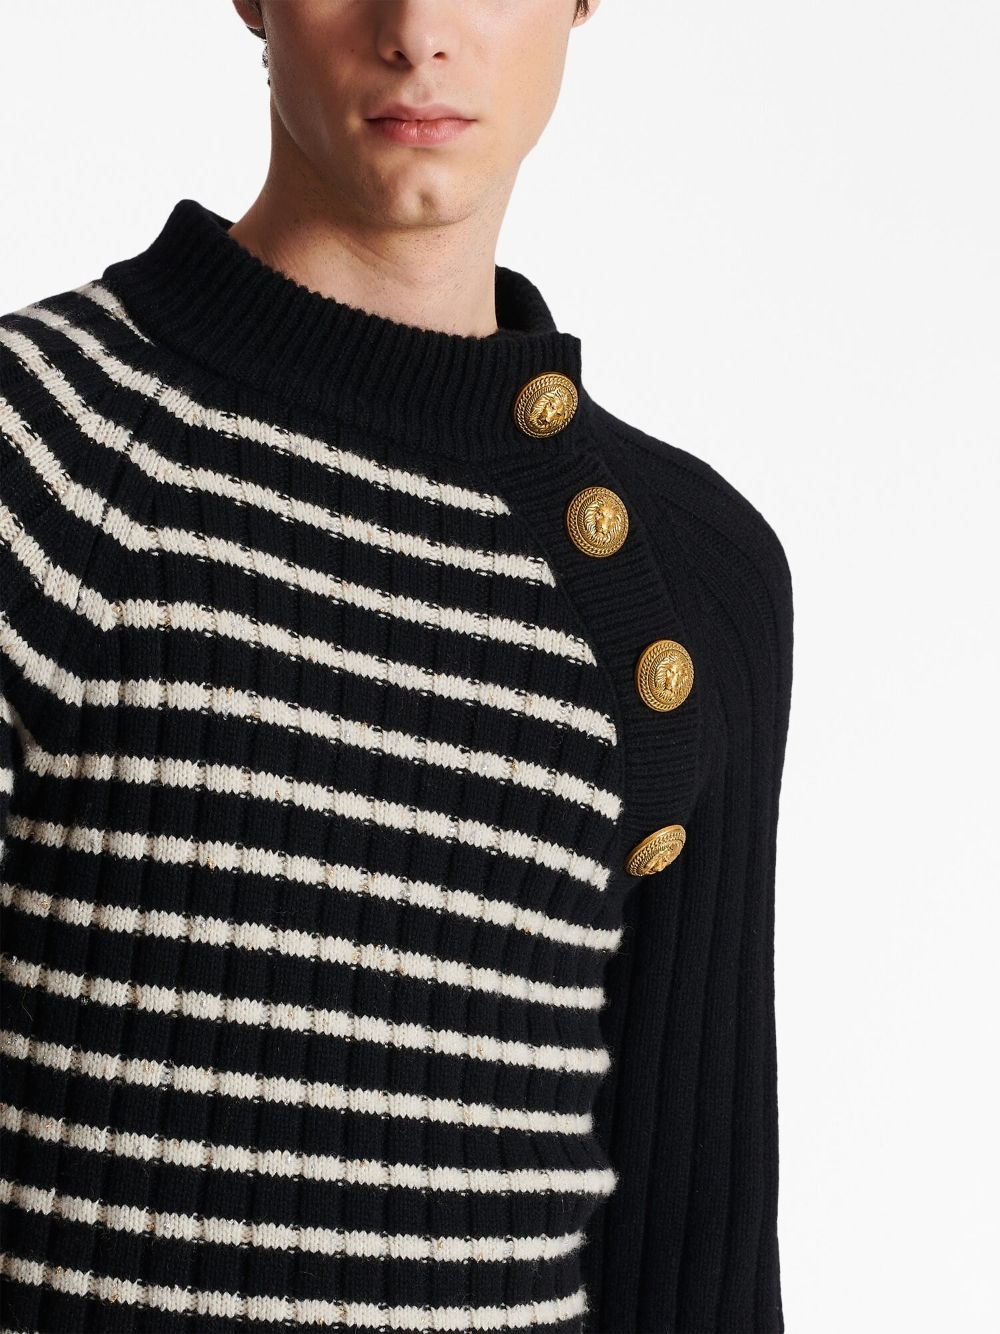 embossed-button striped jumper - 7